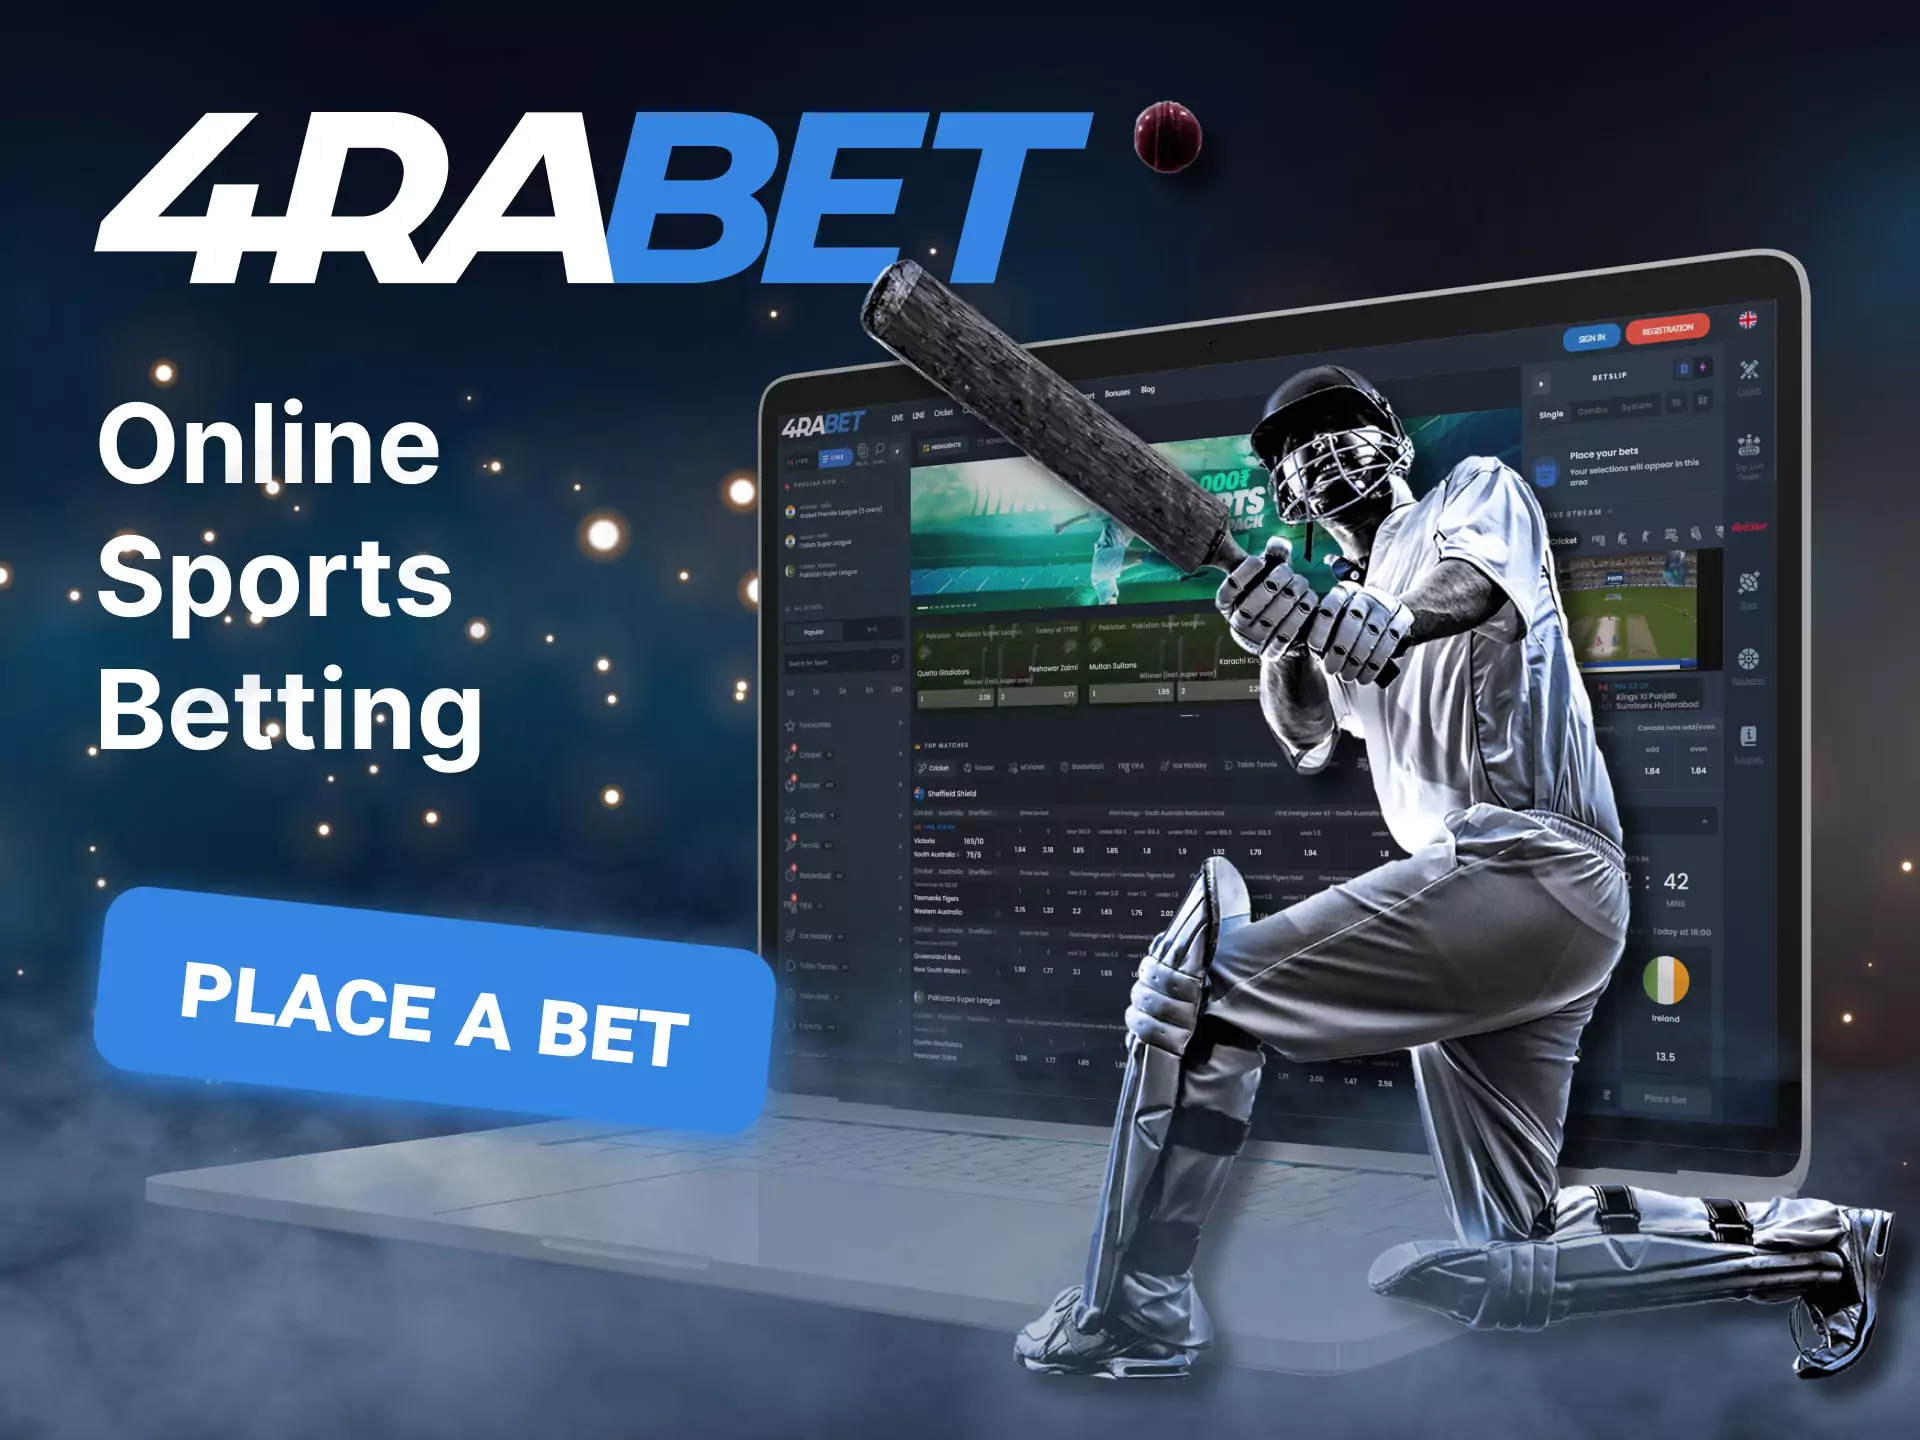 Bet on cricket, soccer, basketball and other sports at 4rabet.